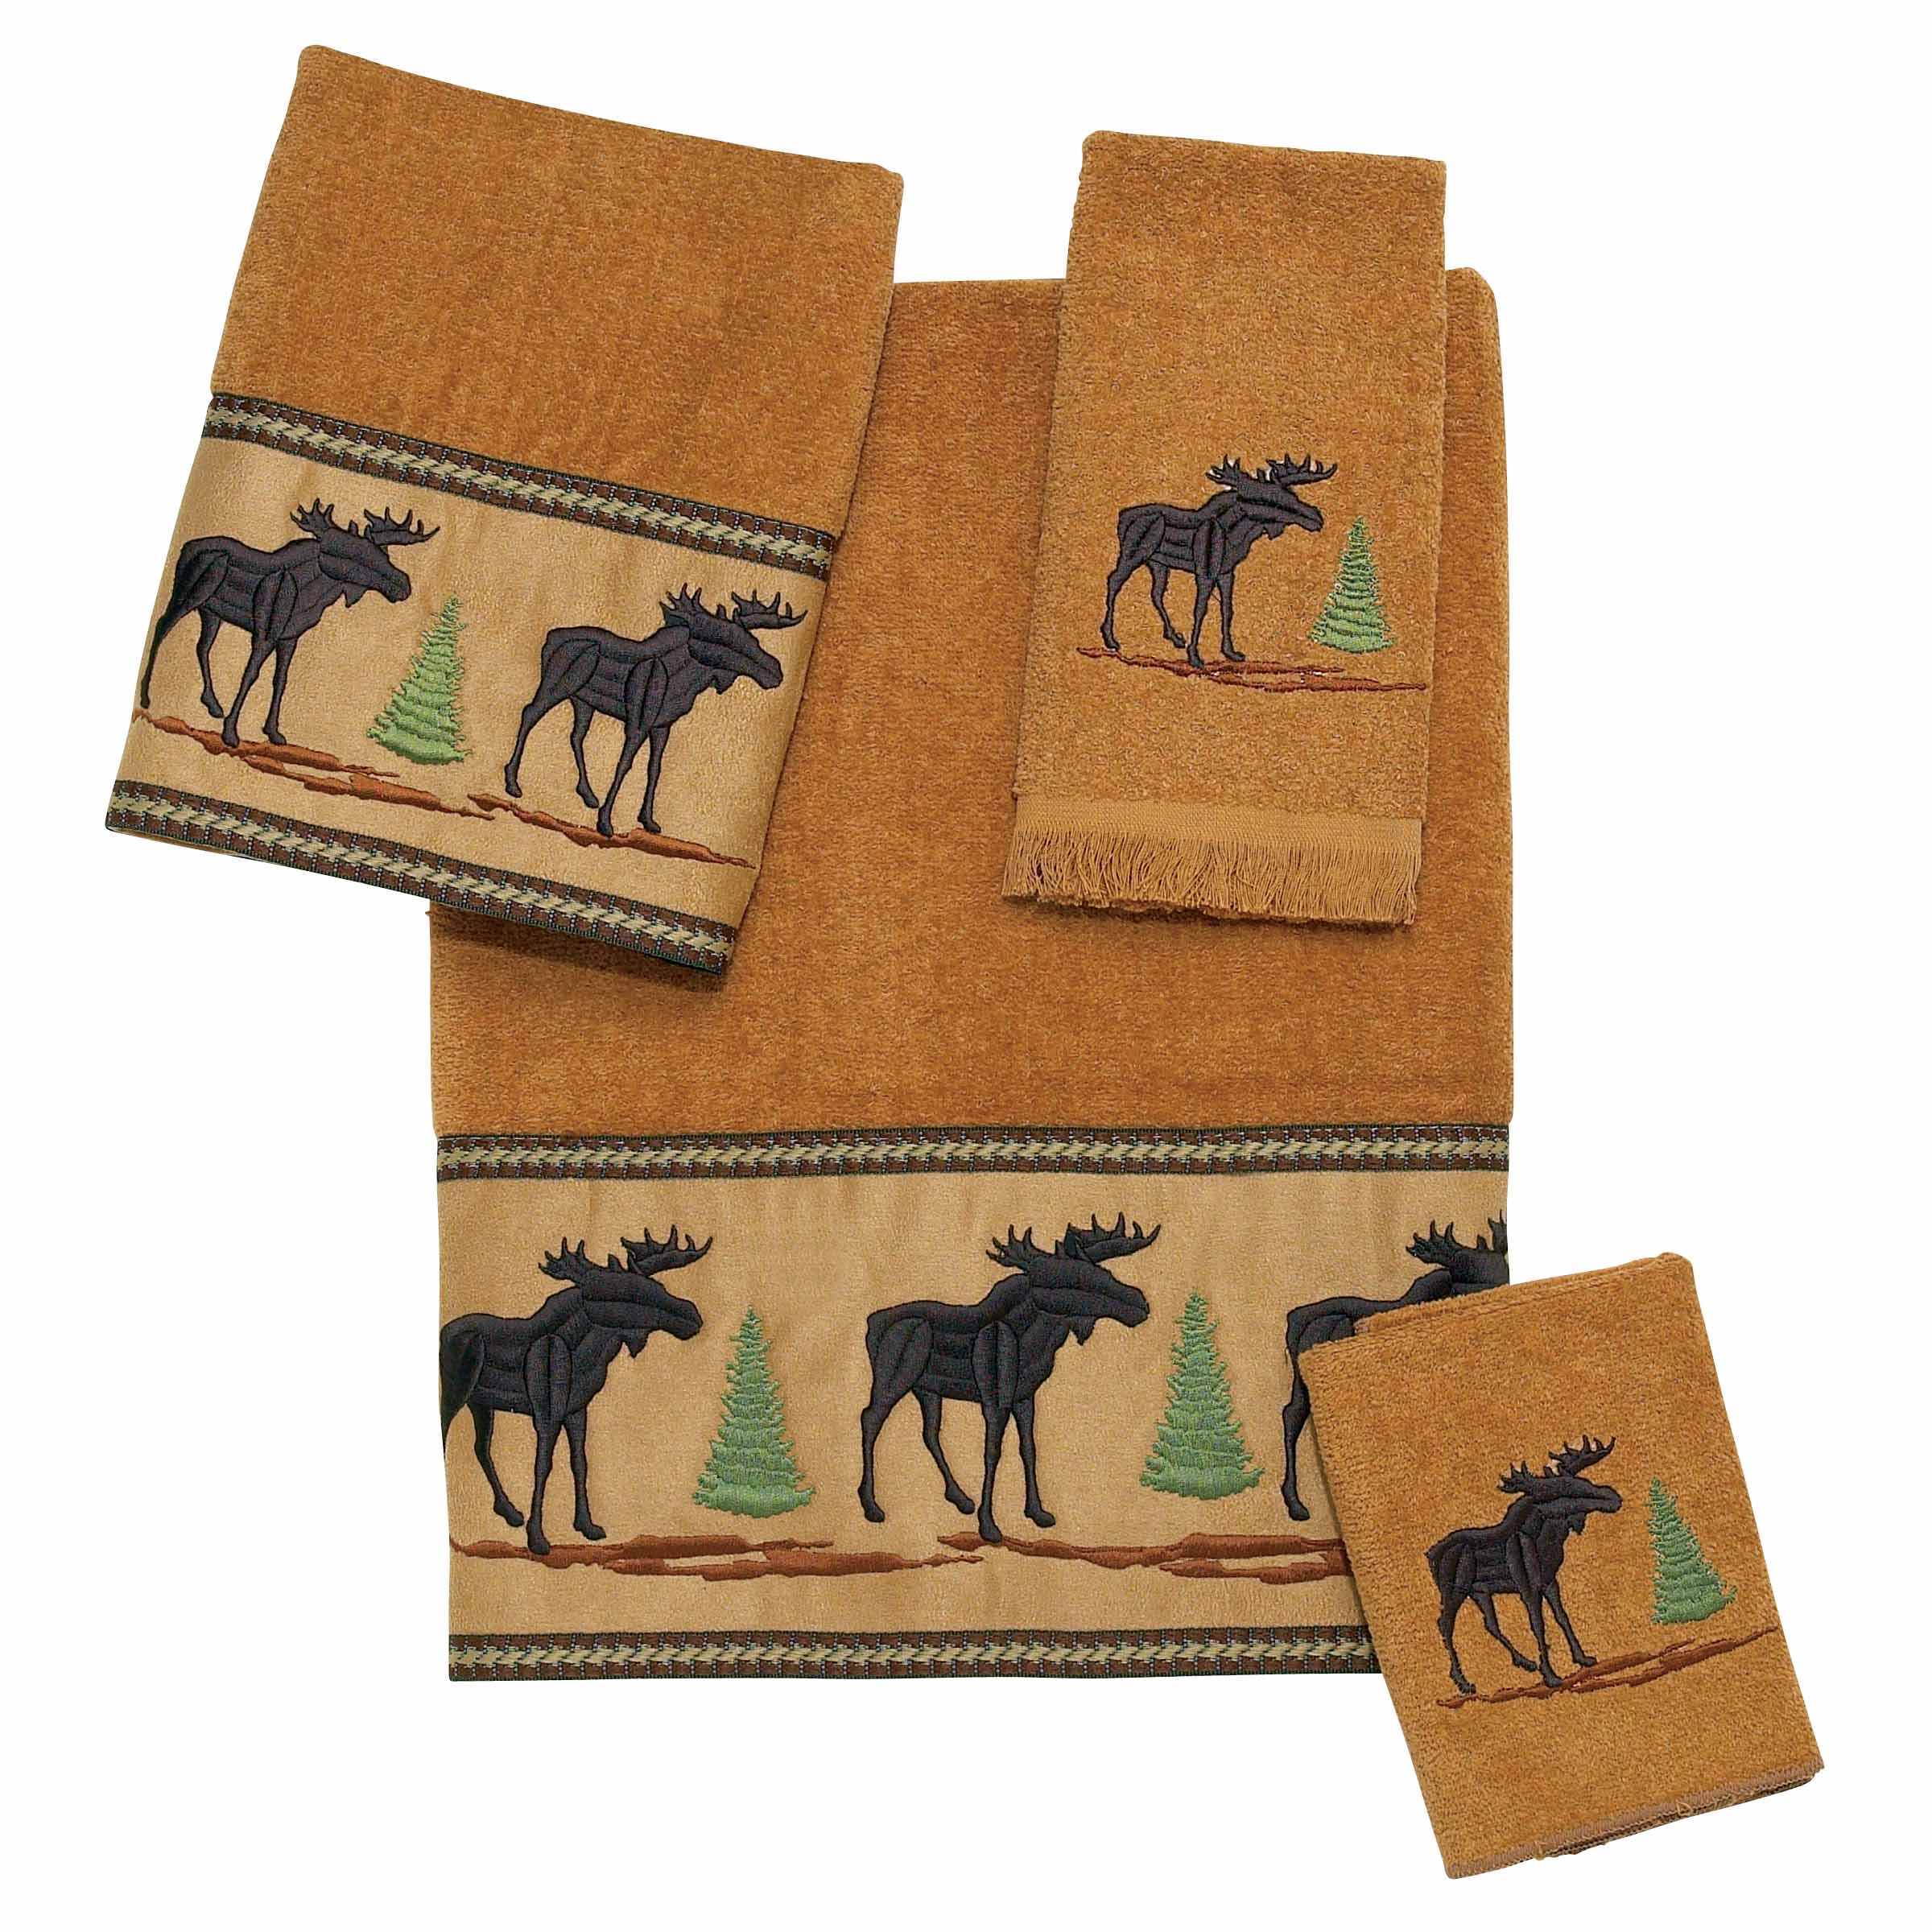 CABIN SCENE Canoe Bear Moose EMBROIDERED SET 2 BATHROOM HAND TOWELS by laura 